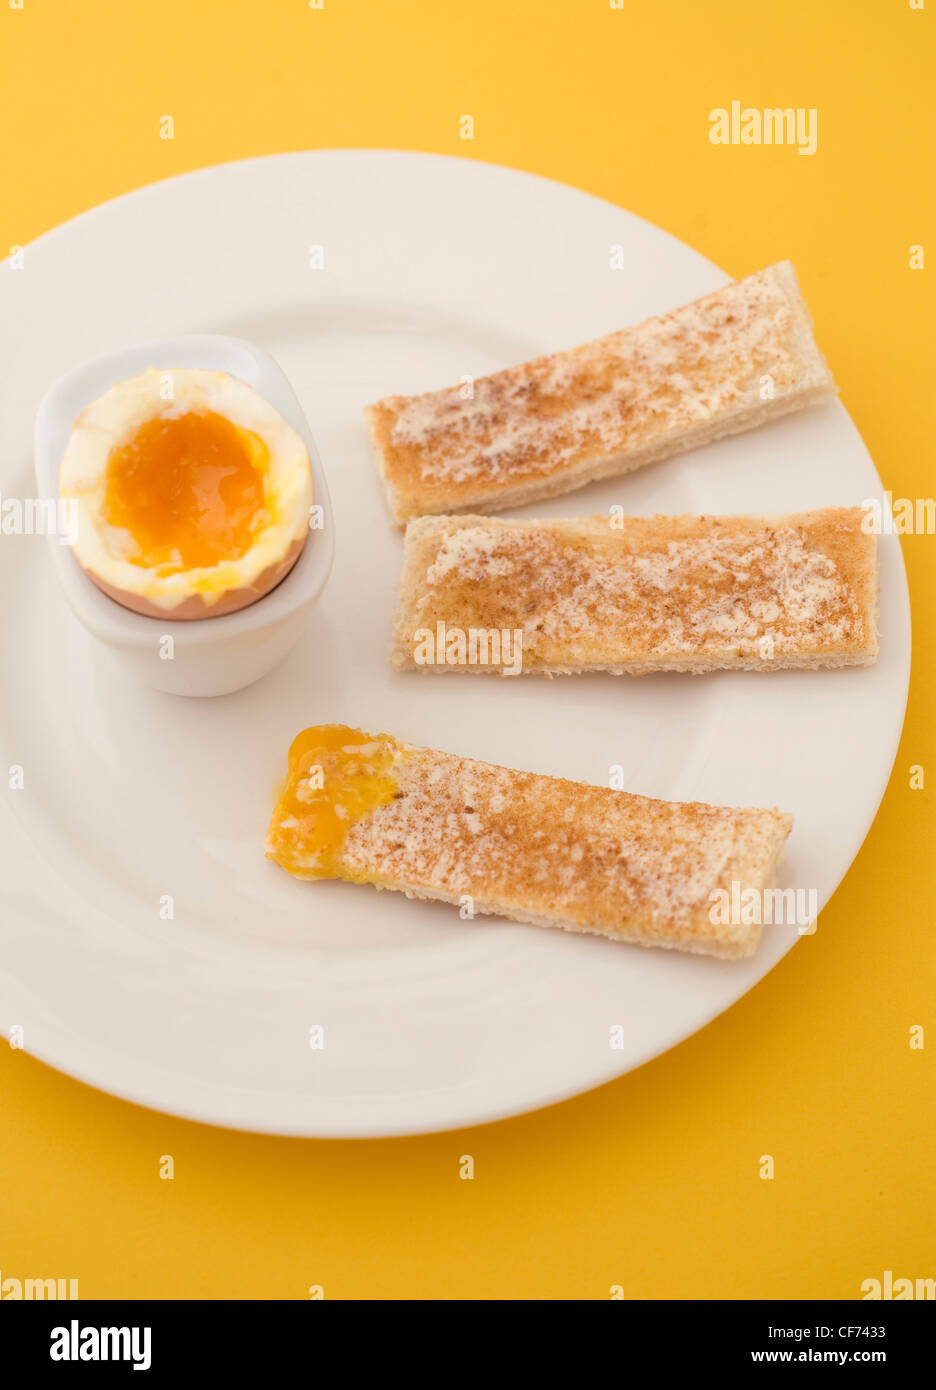 Soft boiled egg in a white egg cup on white plate with brown buttered toast fingers dipped in egg yolk Stock Photo